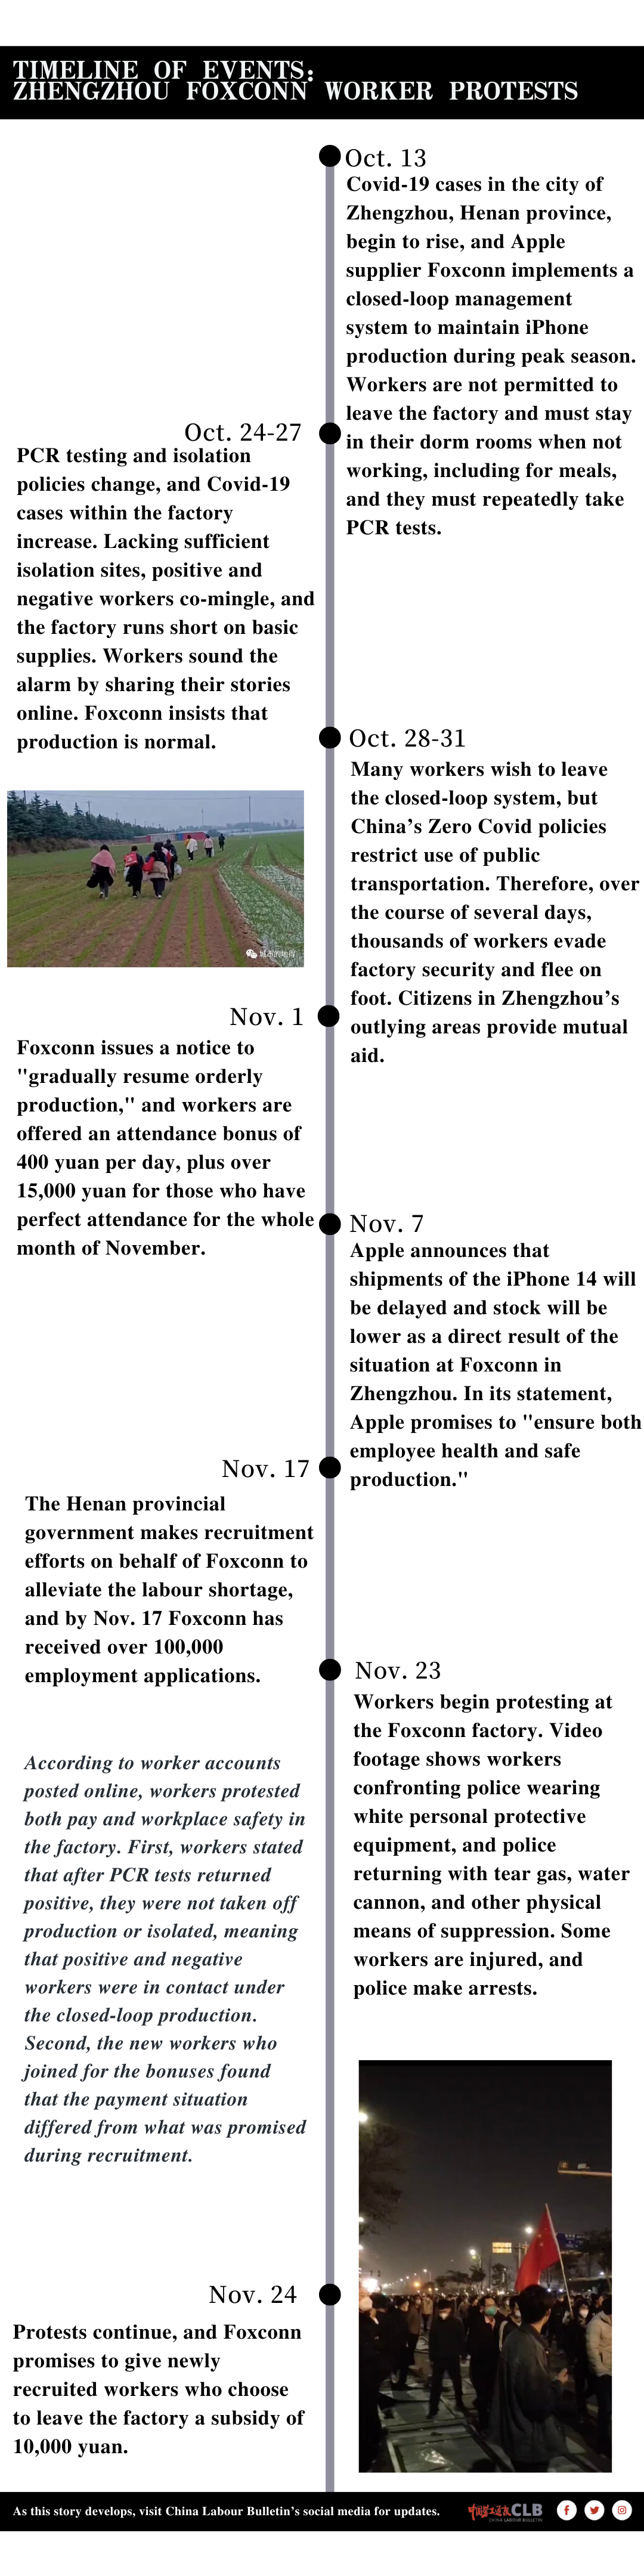 A timeline of events from 13 October to 24 November describes the escalation of conflict at Zhengzhou Foxconn